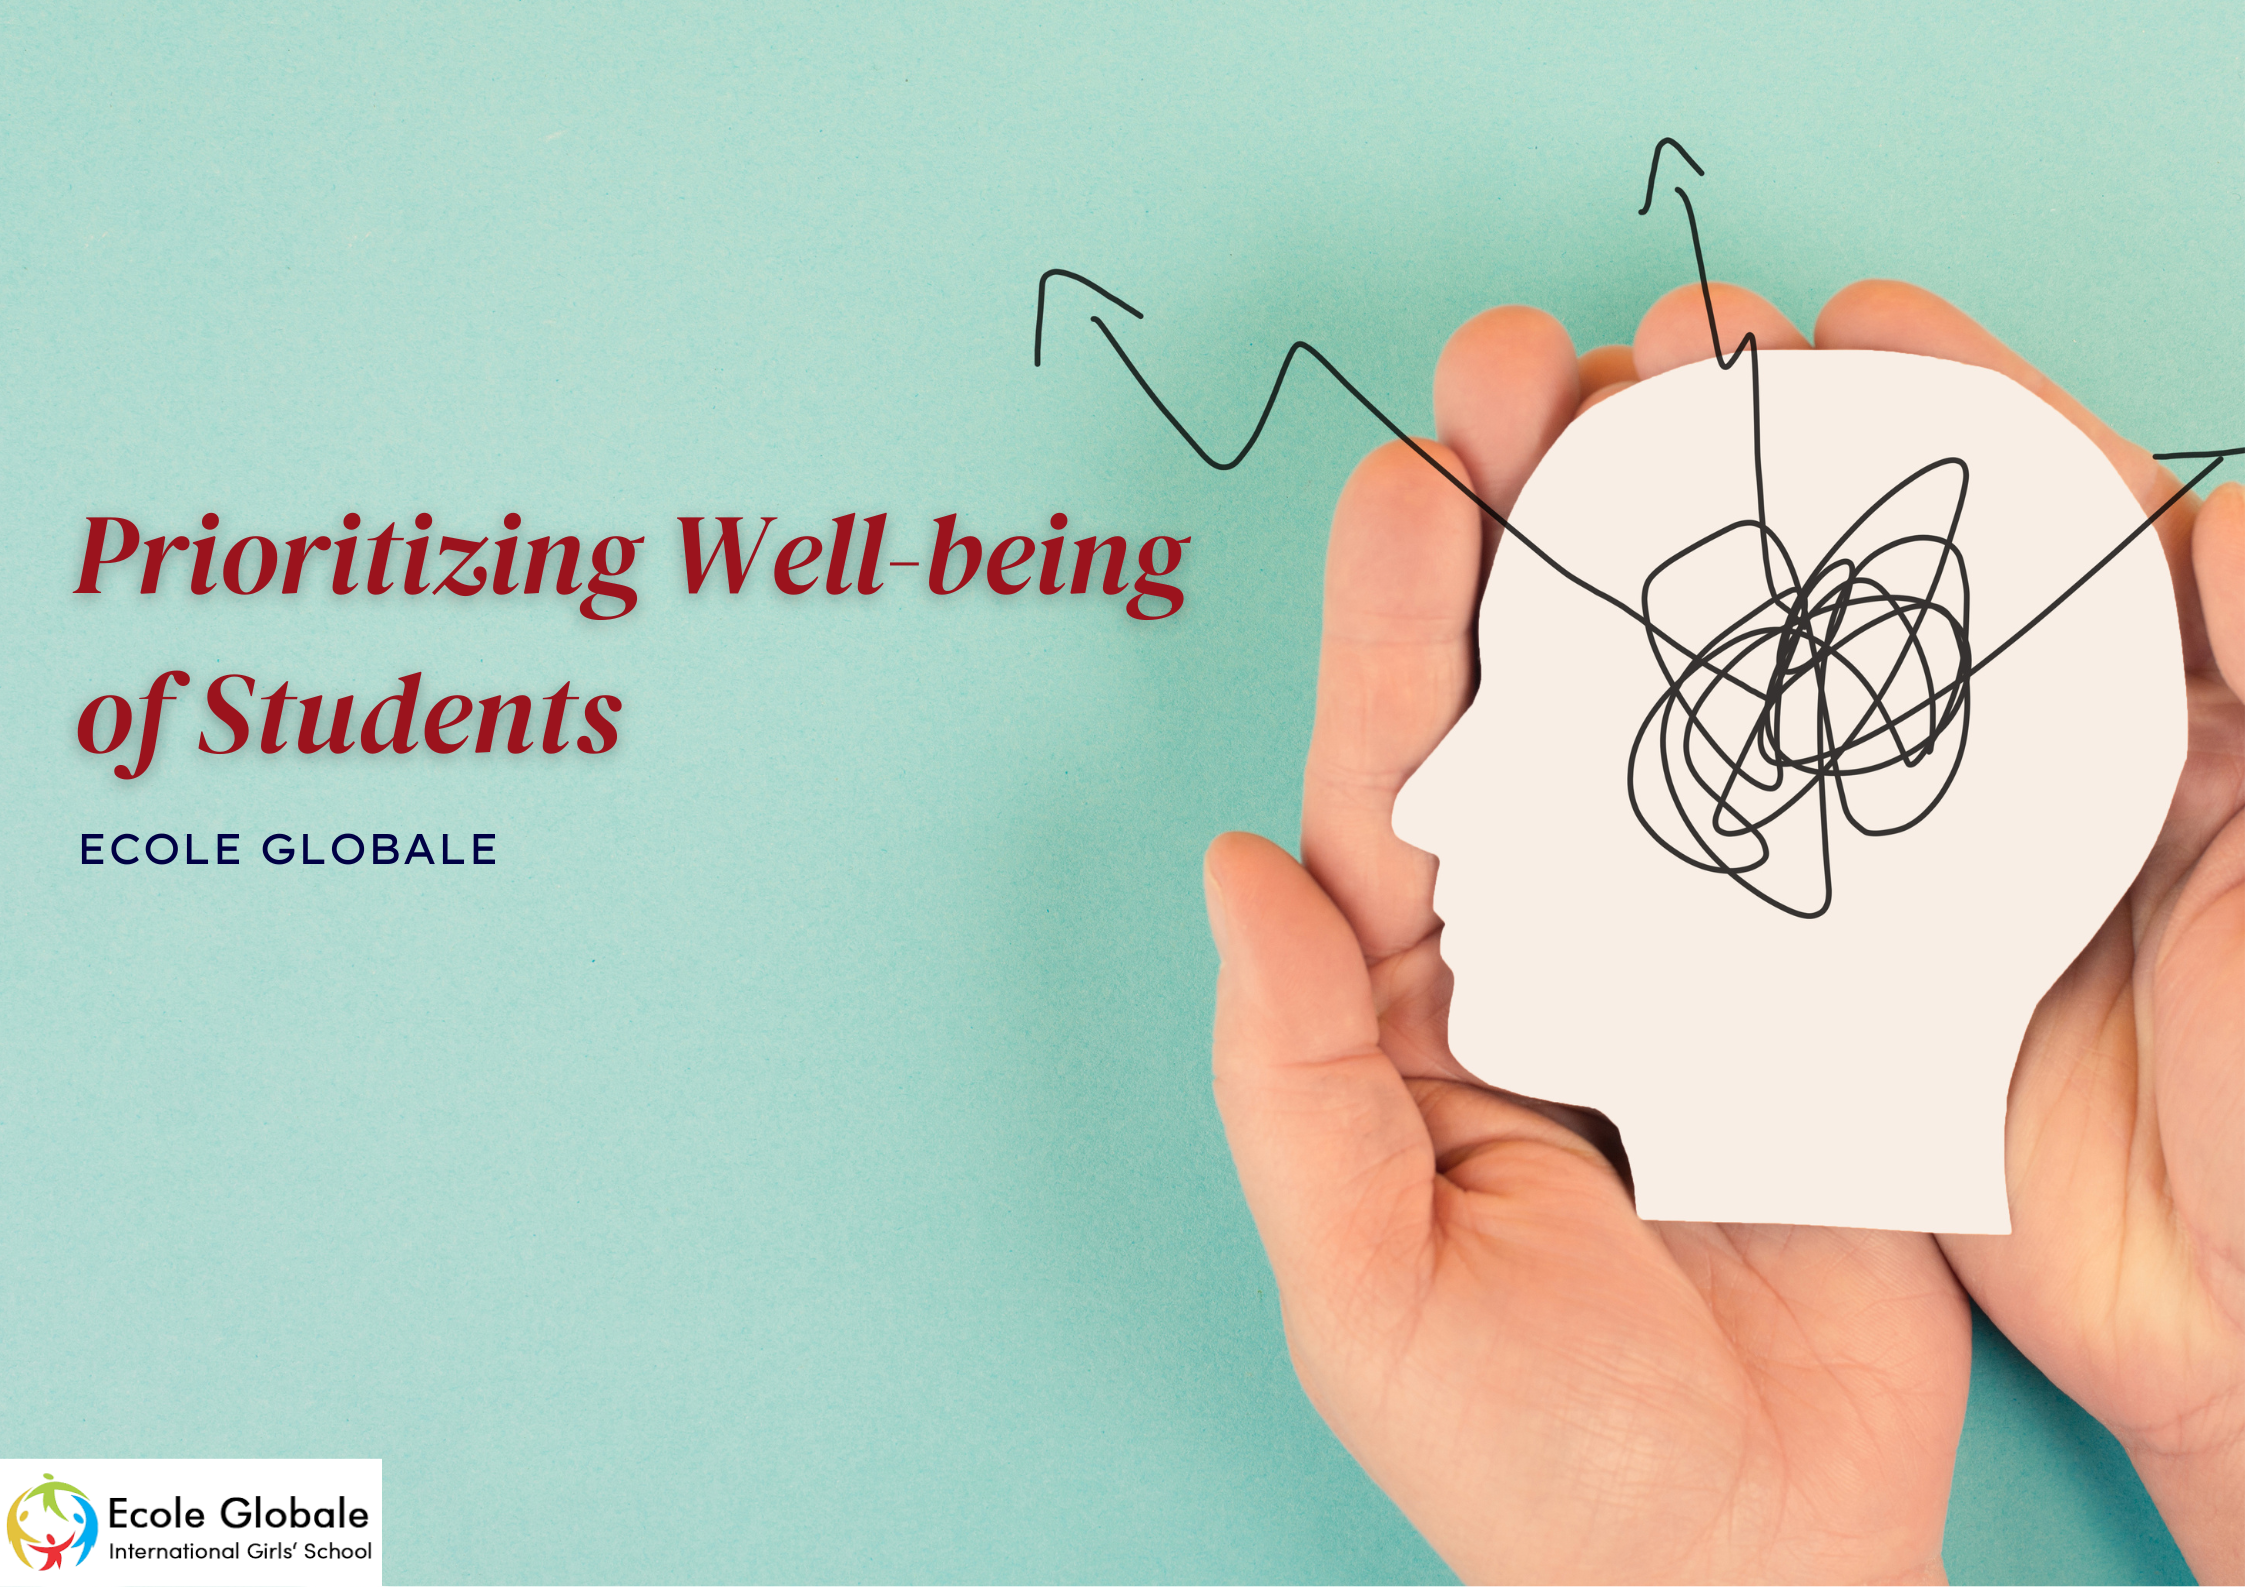 You are currently viewing Prioritizing Well-being of Students at Ecole Globale